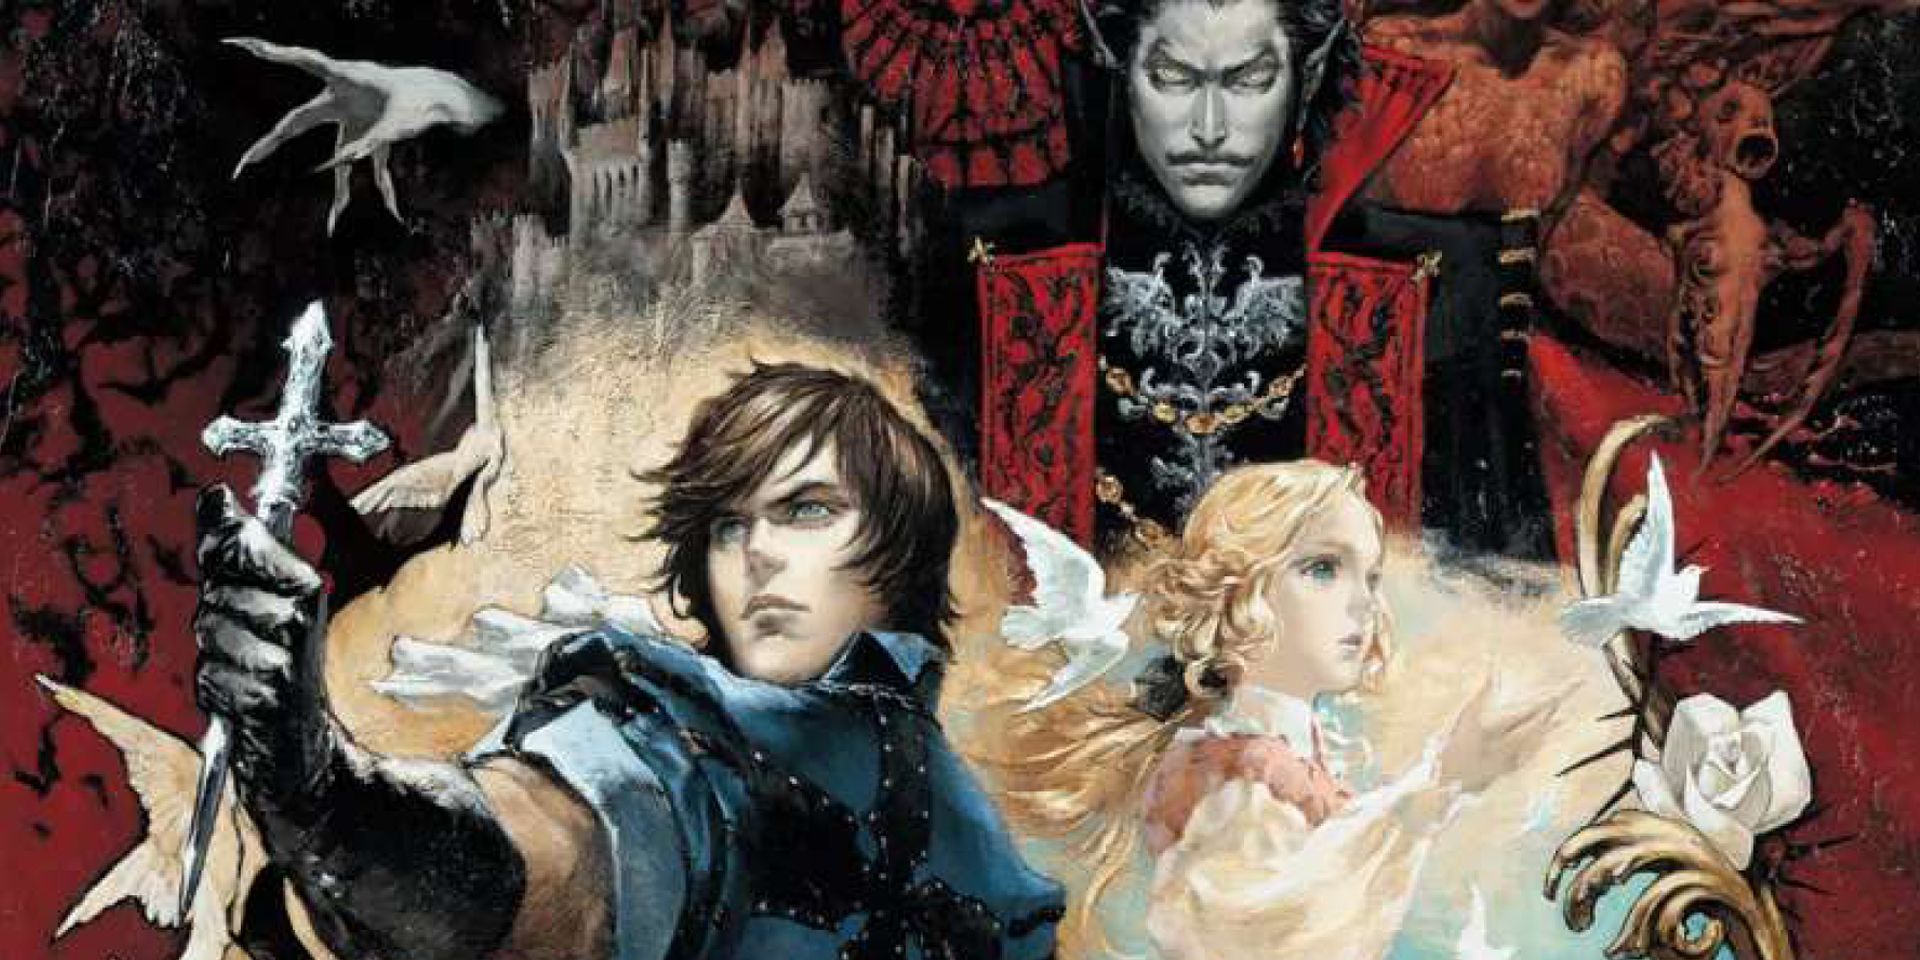 Richter, Maria and Dracula pose in this concept art.